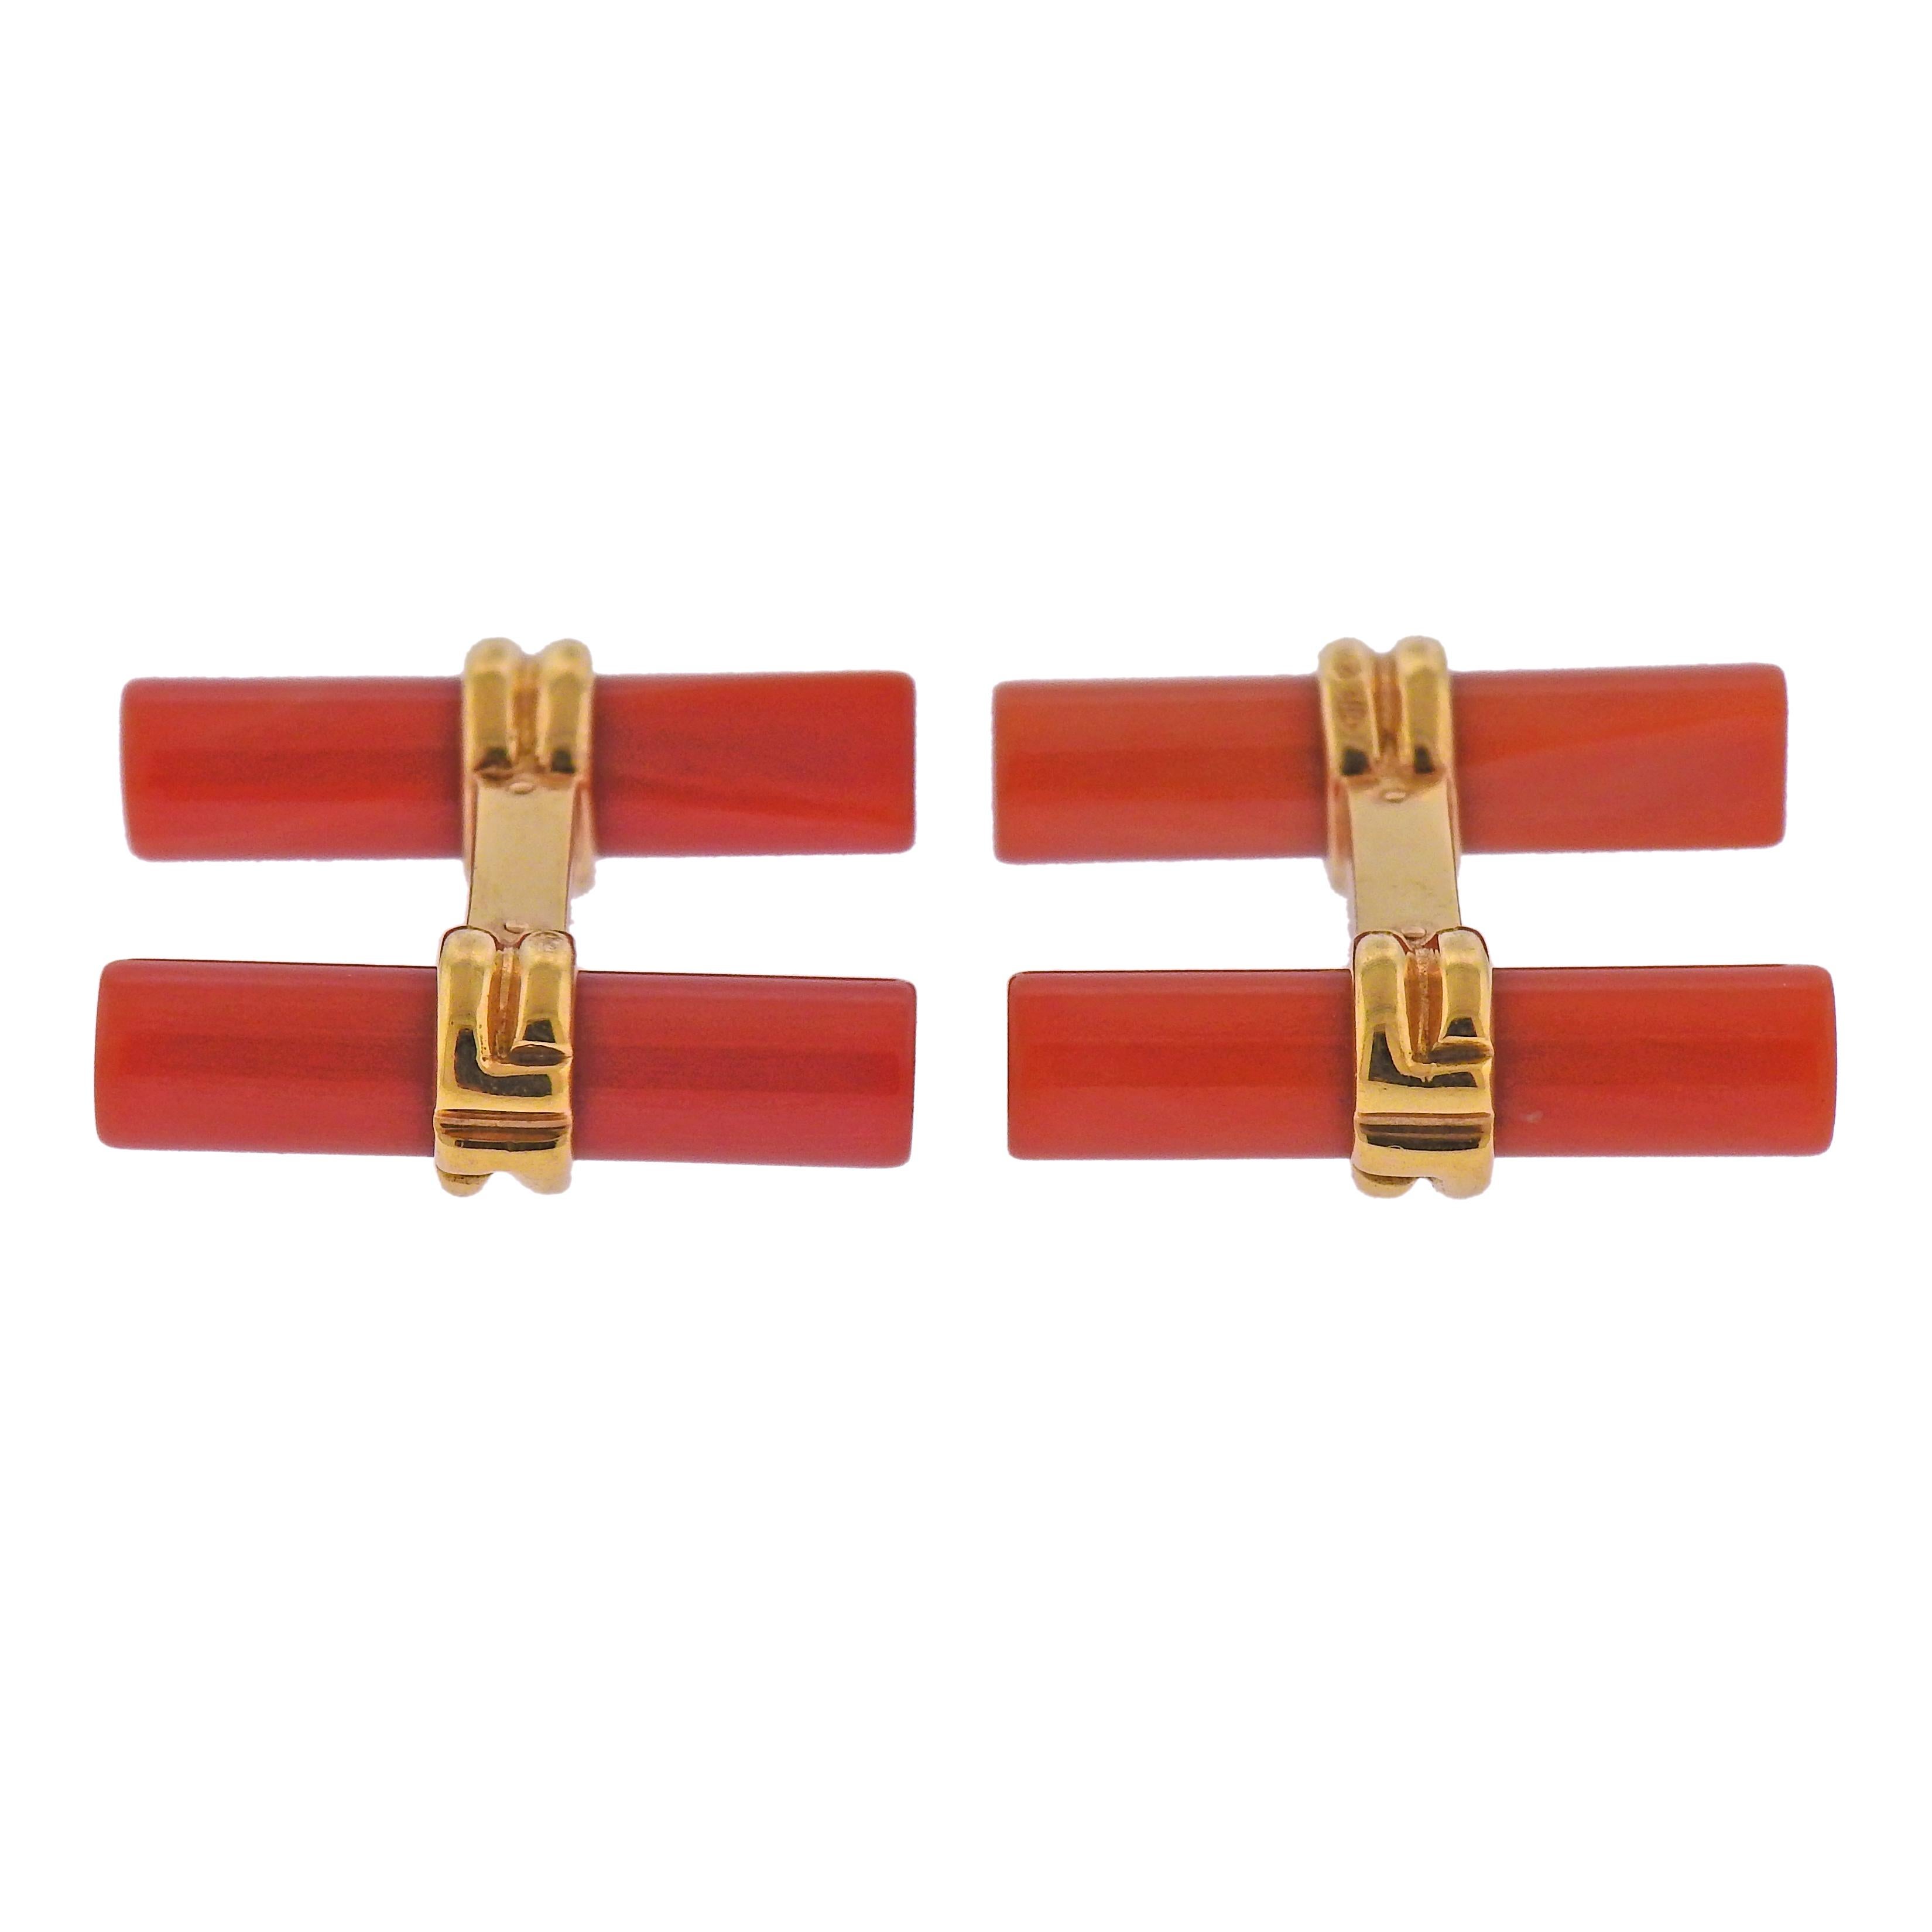 Pair of classic bar cufflinks by Boucheron Paris, with coral in 18k gold. Each side measures 24mm x 8mm.  Weight - 9.5 grams. Marked: Boucheron, Or750, E14237.